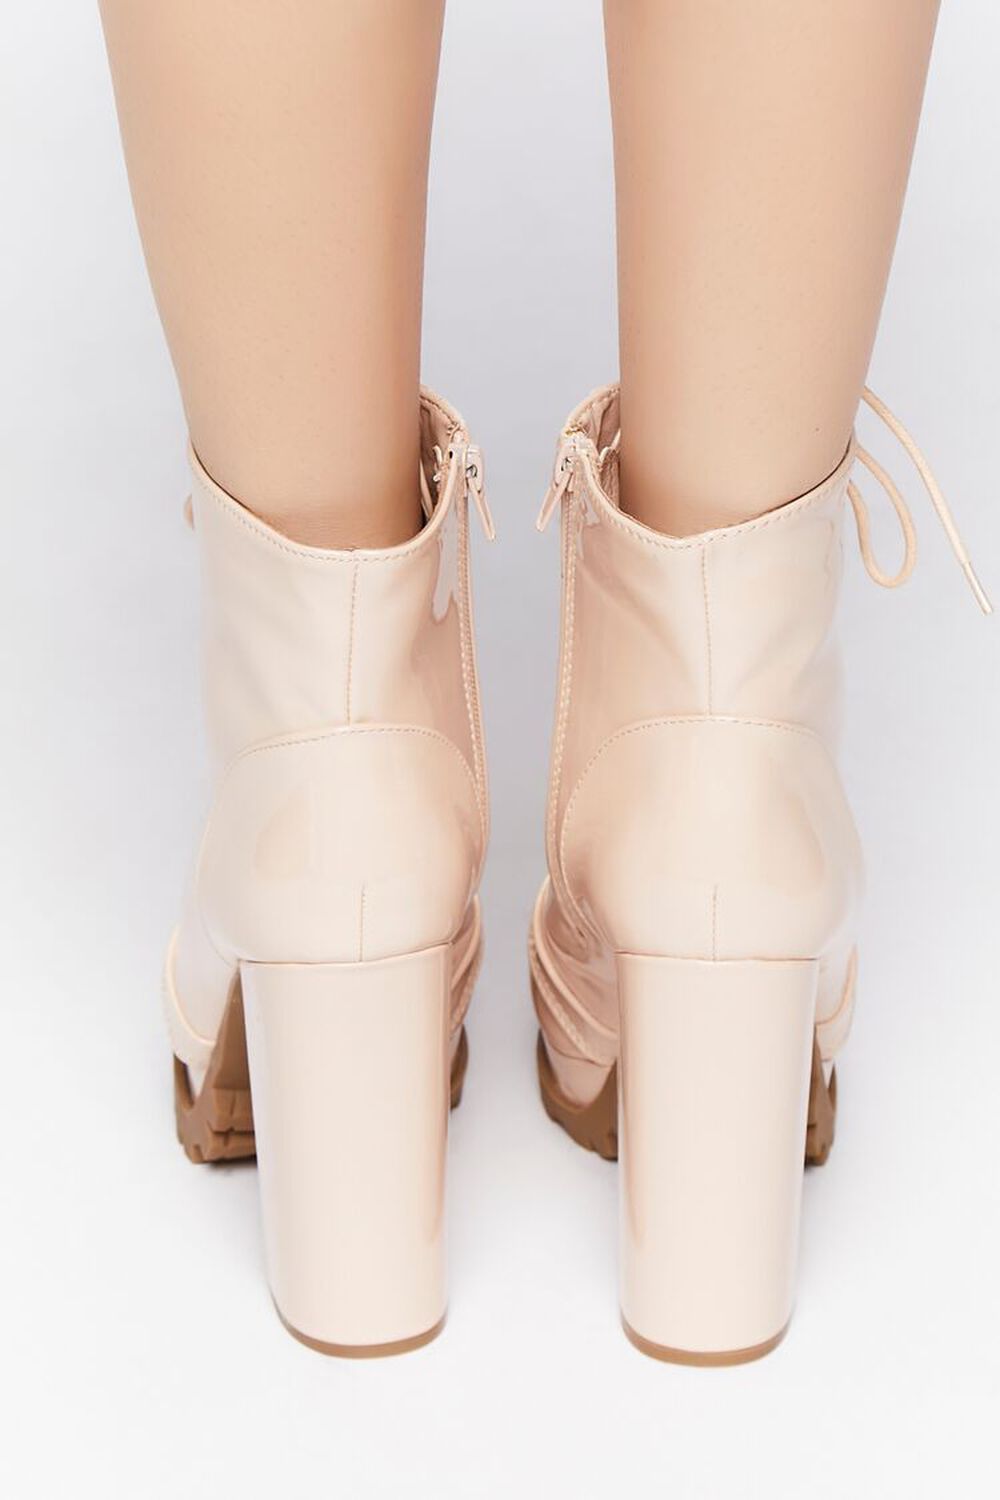 NUDE Faux Patent Leather Lace-Up Booties, image 3